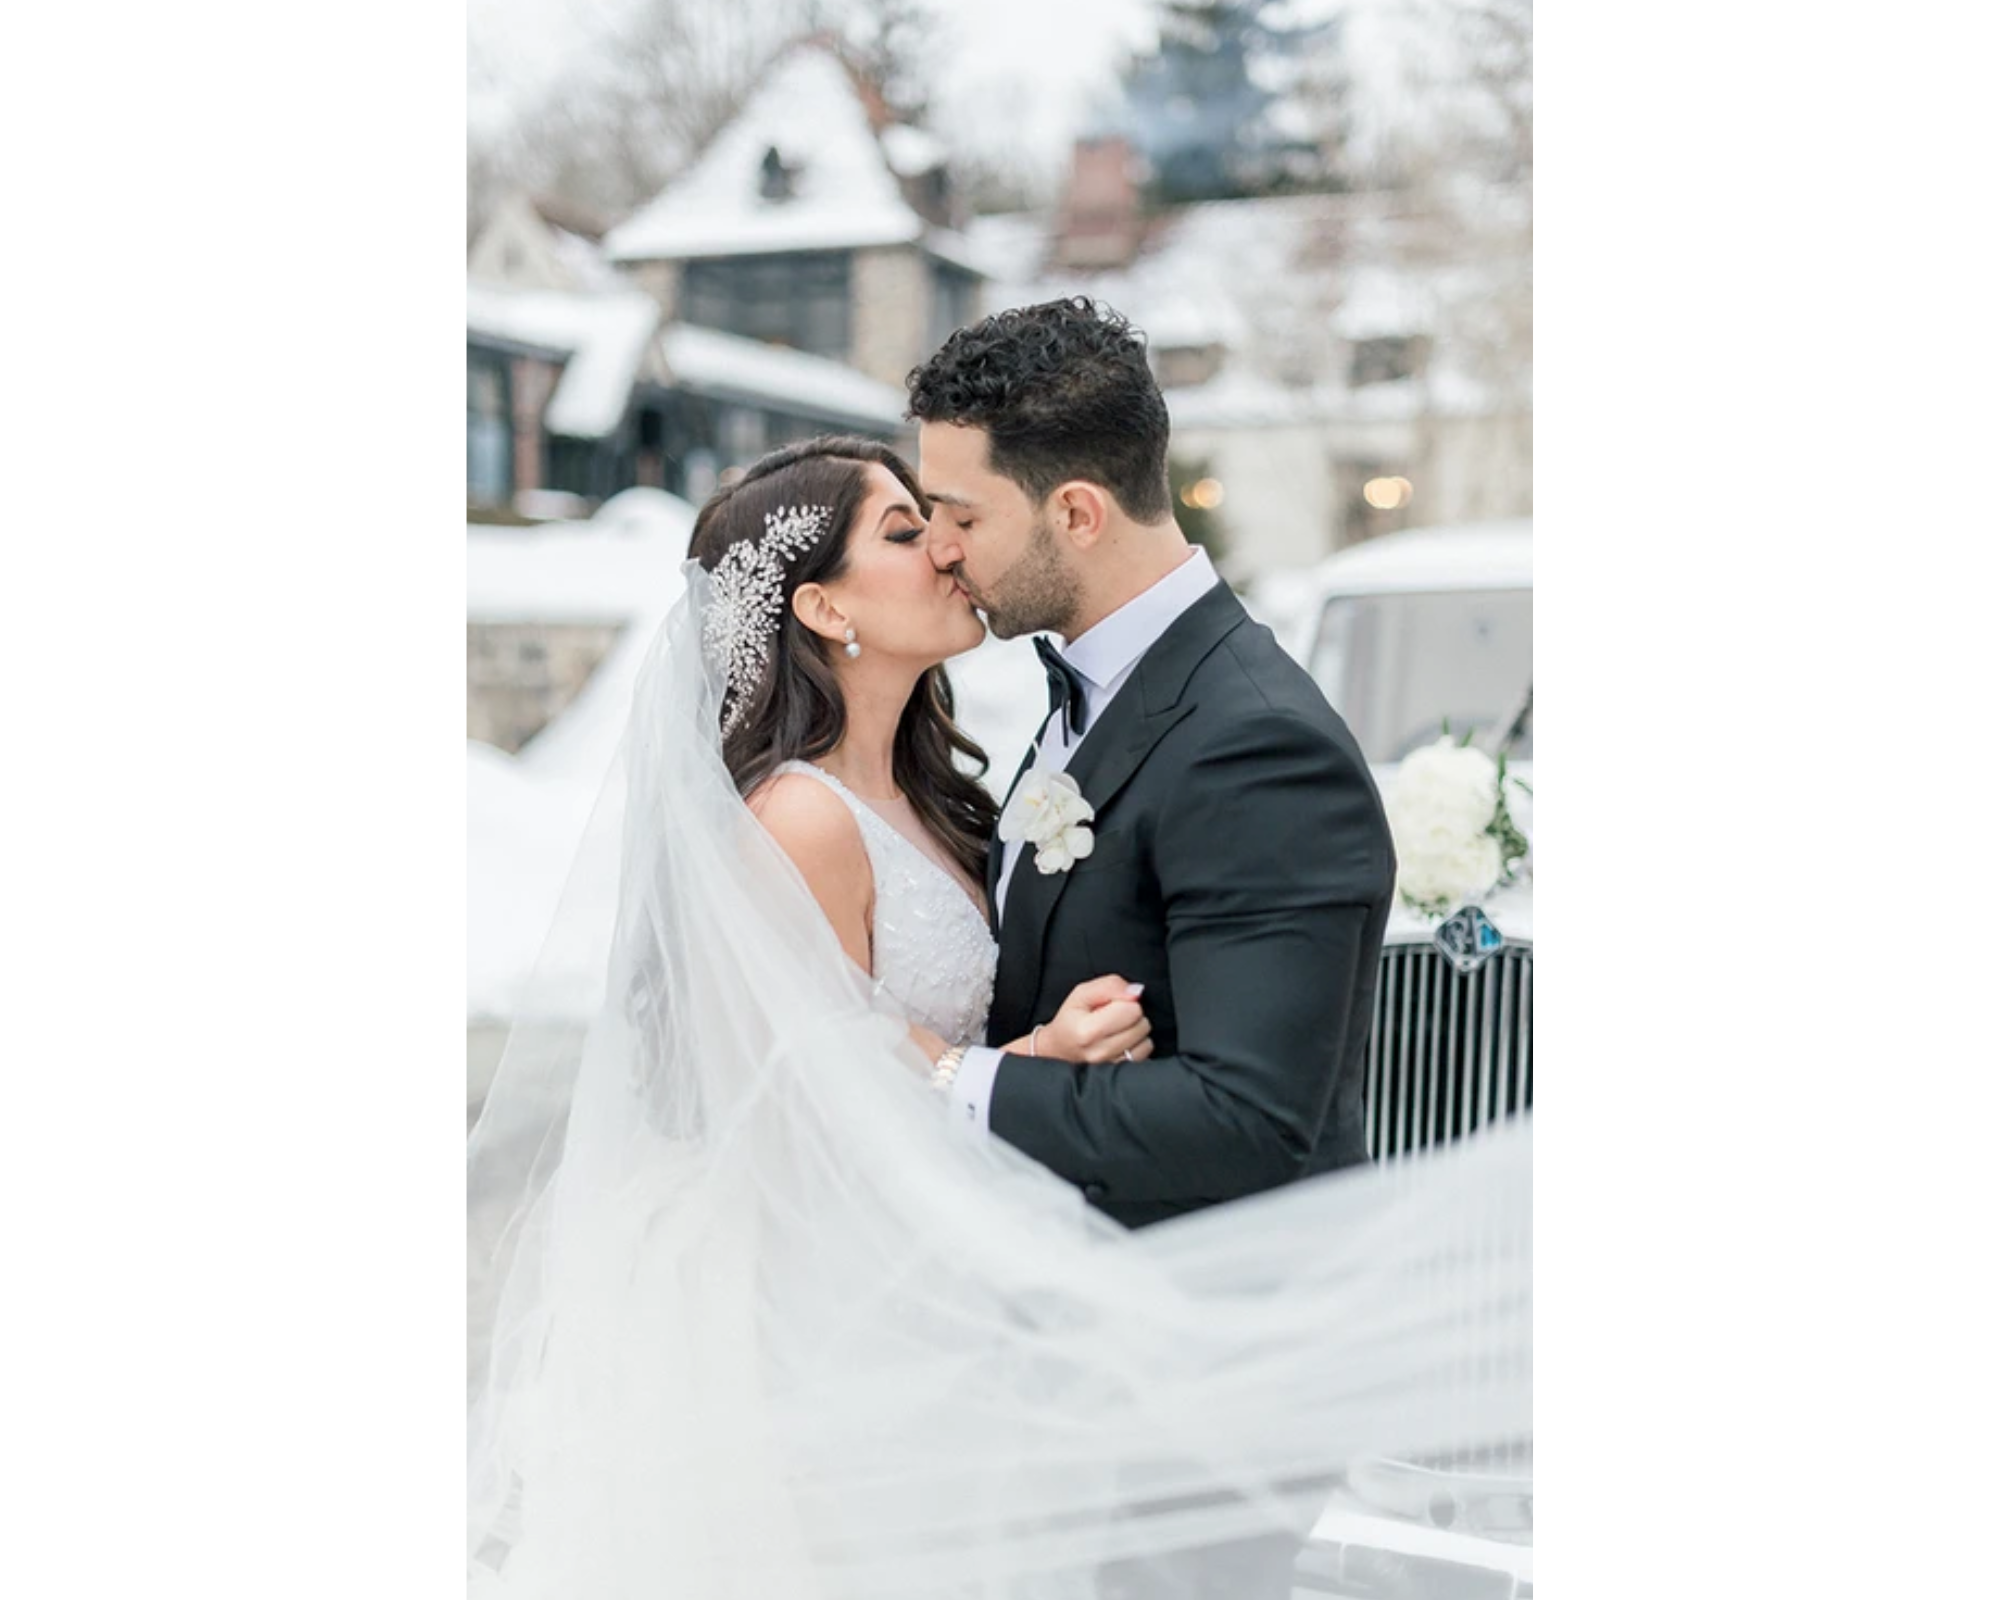 A beautiful bride and groom kiss outside in the snow. Victoria’s cathedral veil flutters in the wind, and her Swarovski crystal headpiece sparkles!